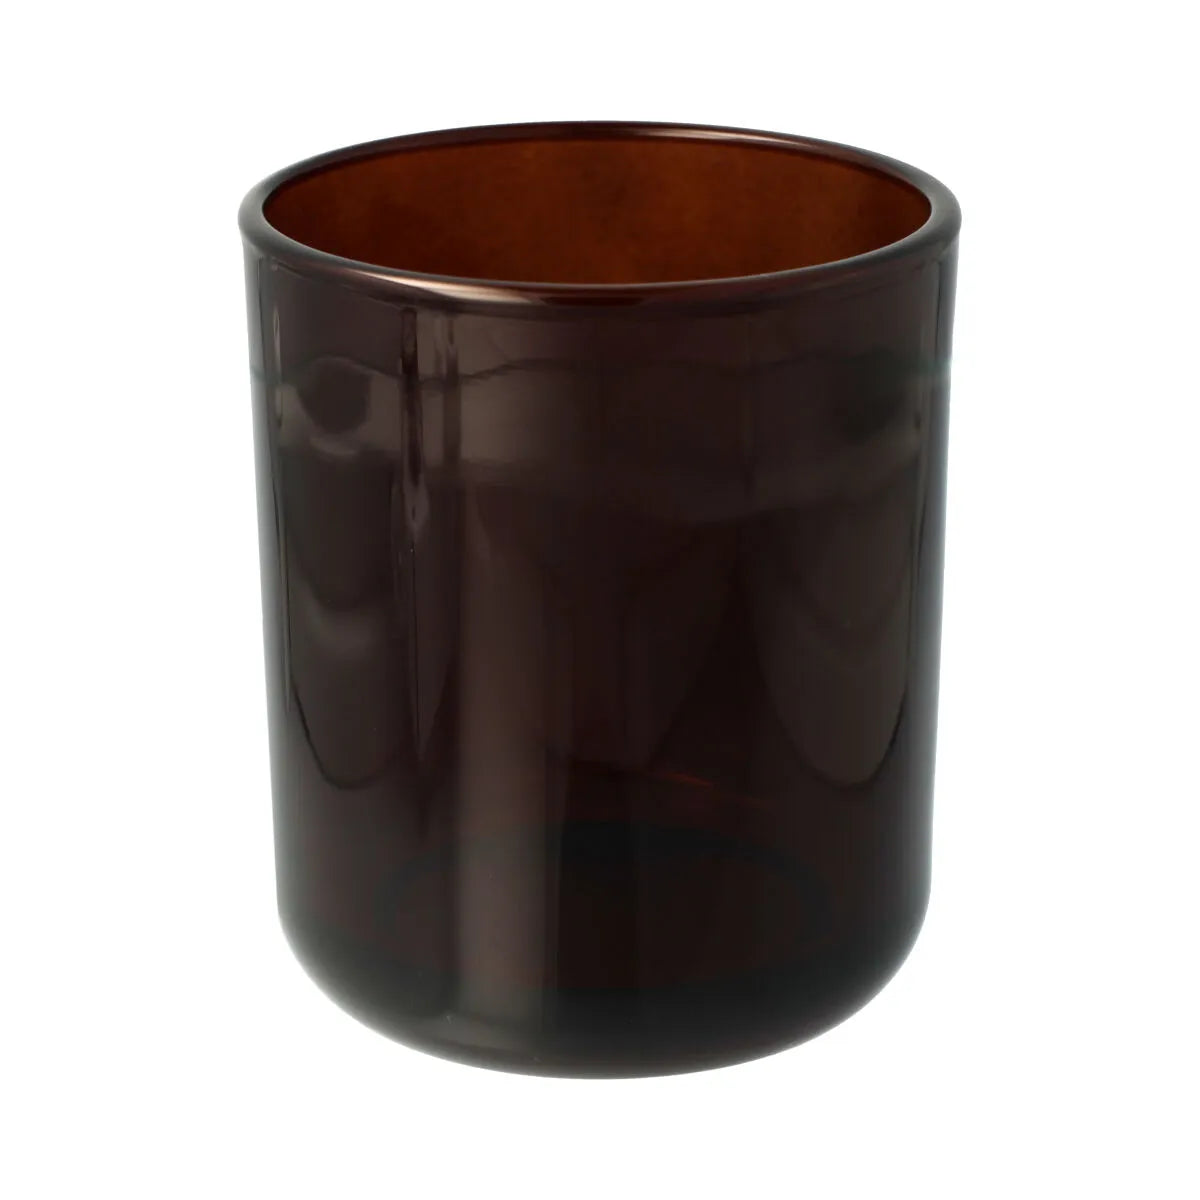 Black Musk & Pear Large Soy Candle